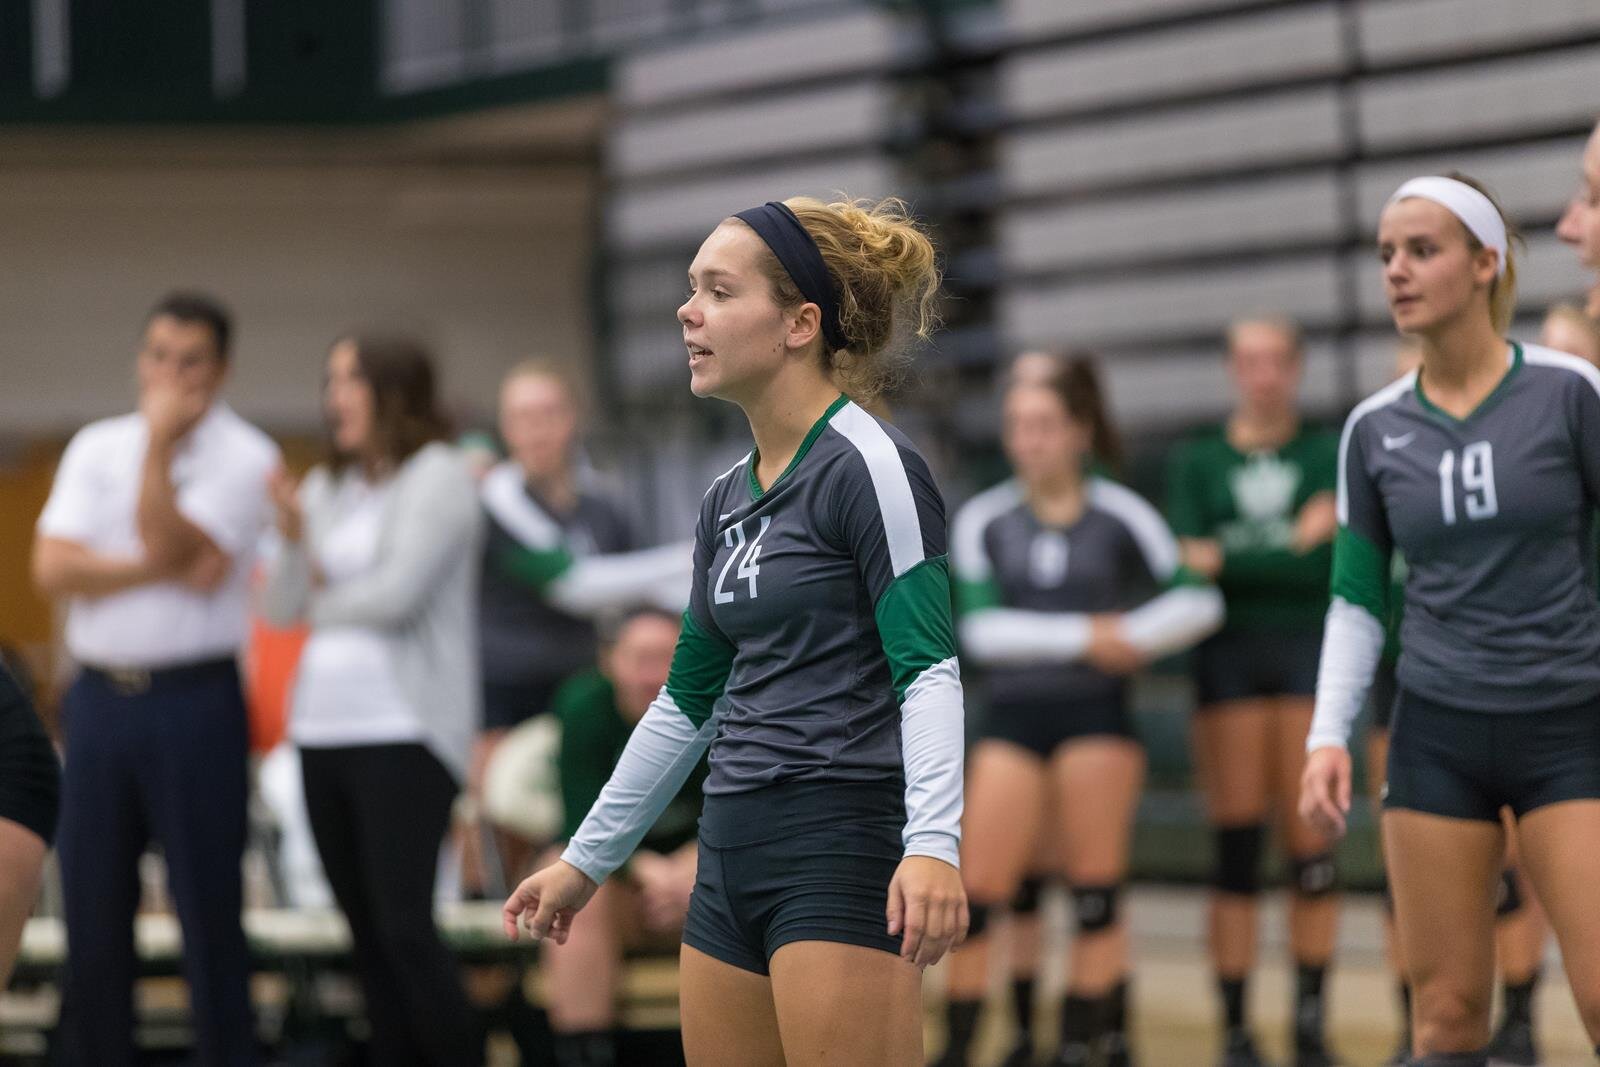 ILLINOIS WESLEYAN UNIVERSITY - Illinois Wesleyan University’s Department of Athletics strives for excellence in all that it does. Their Athletic Department is dedicated to providing an environment with equitable opportunities for all student-athletes and staff. 